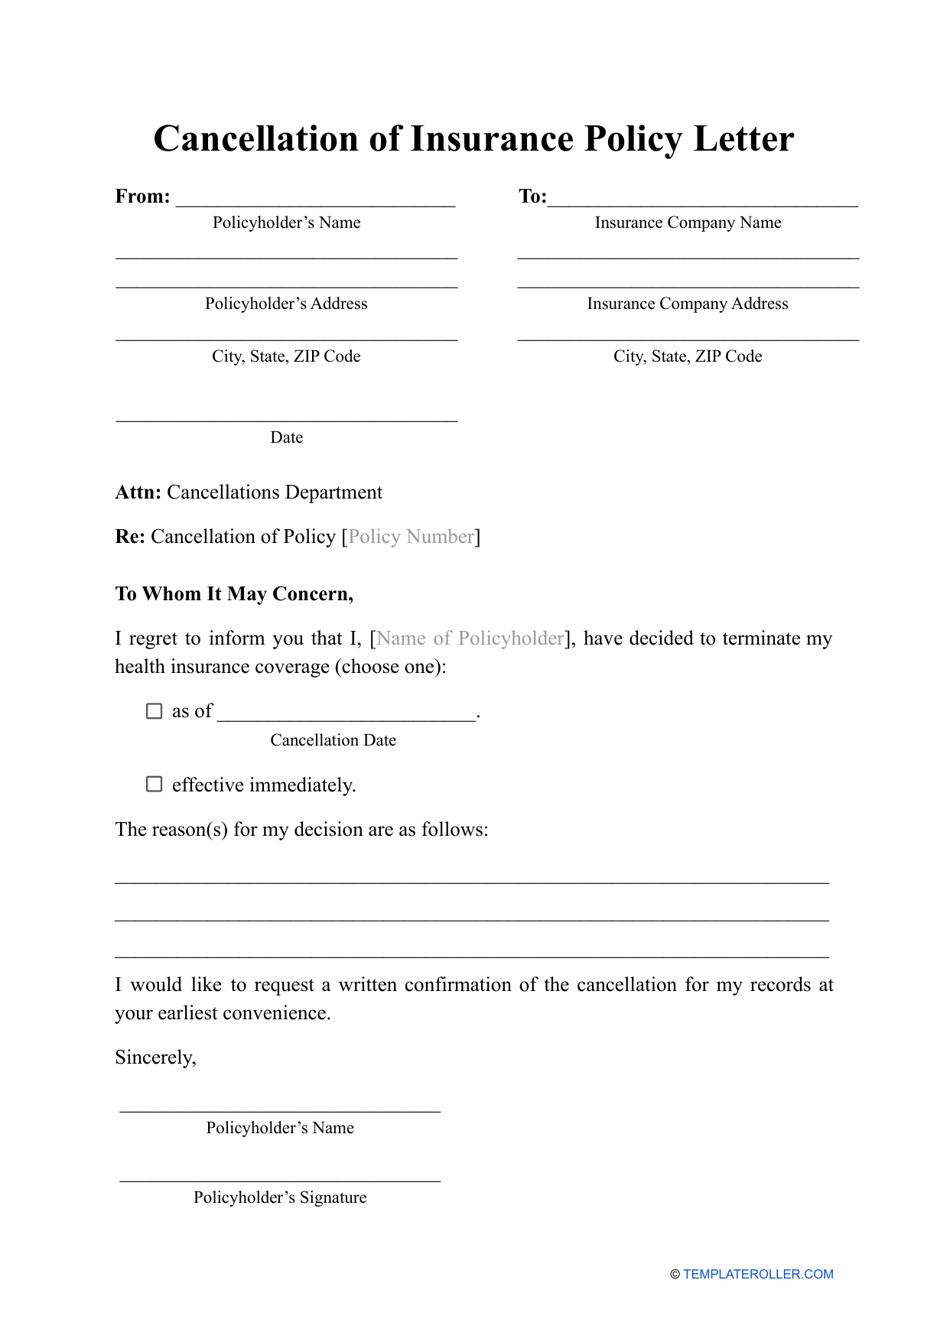 Cancellation of Insurance Policy Letter Template Download Printable PDF